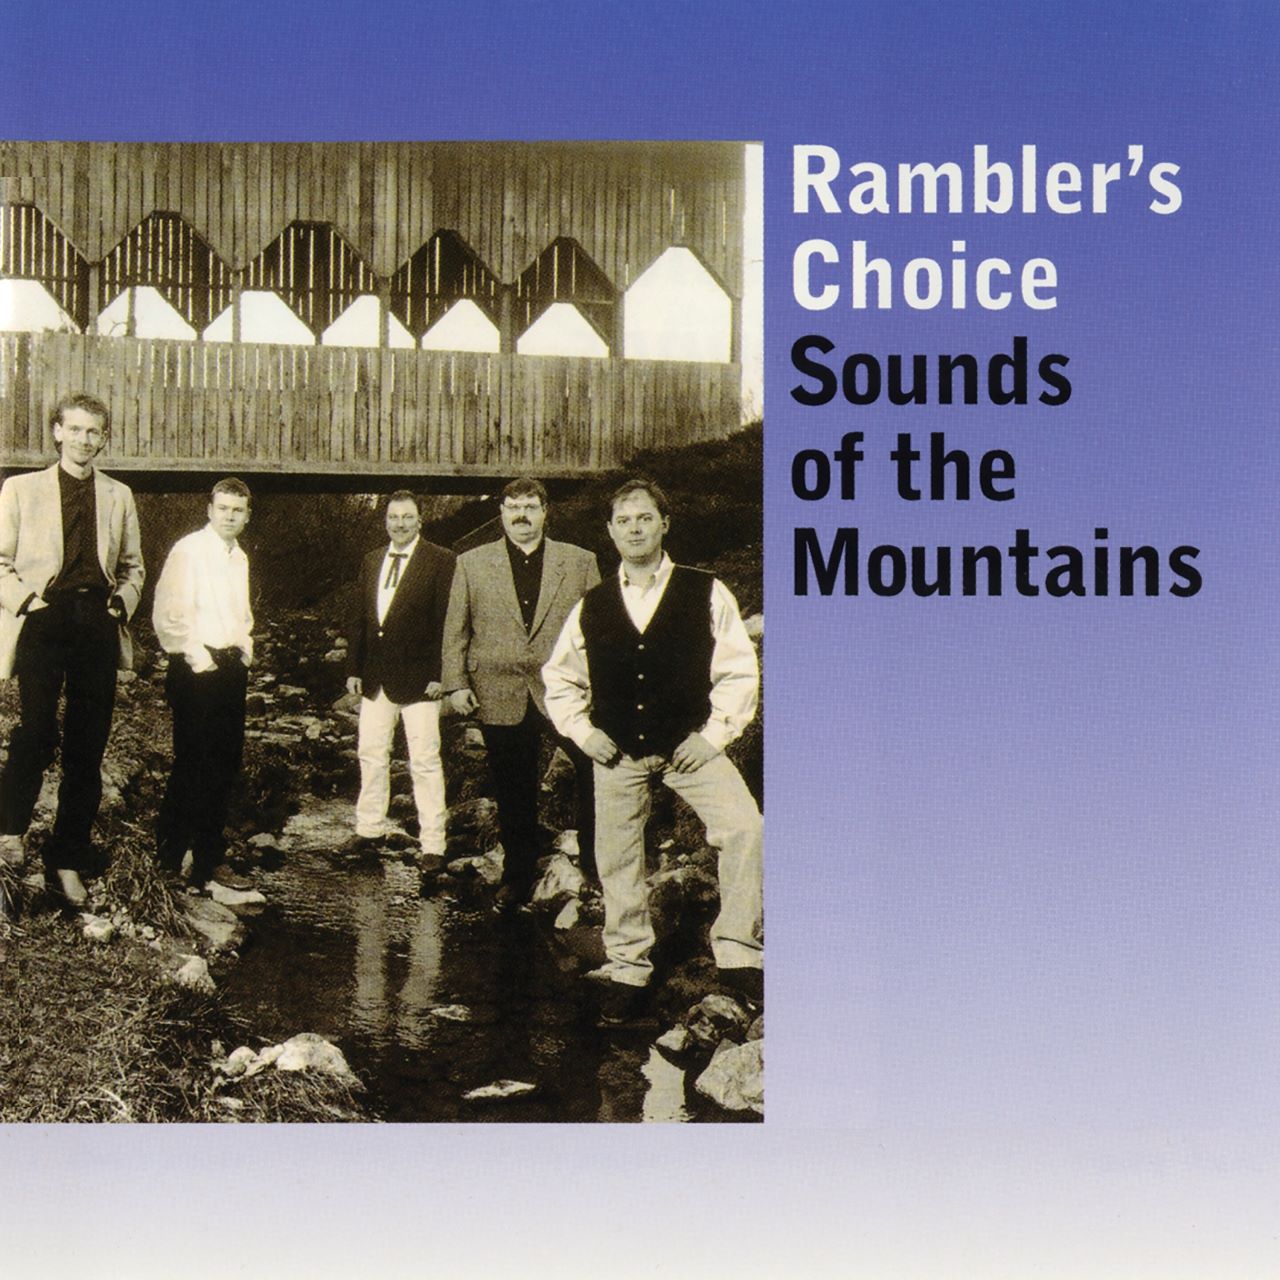 Rambler's Choise - Sound Of The Mountains cover album